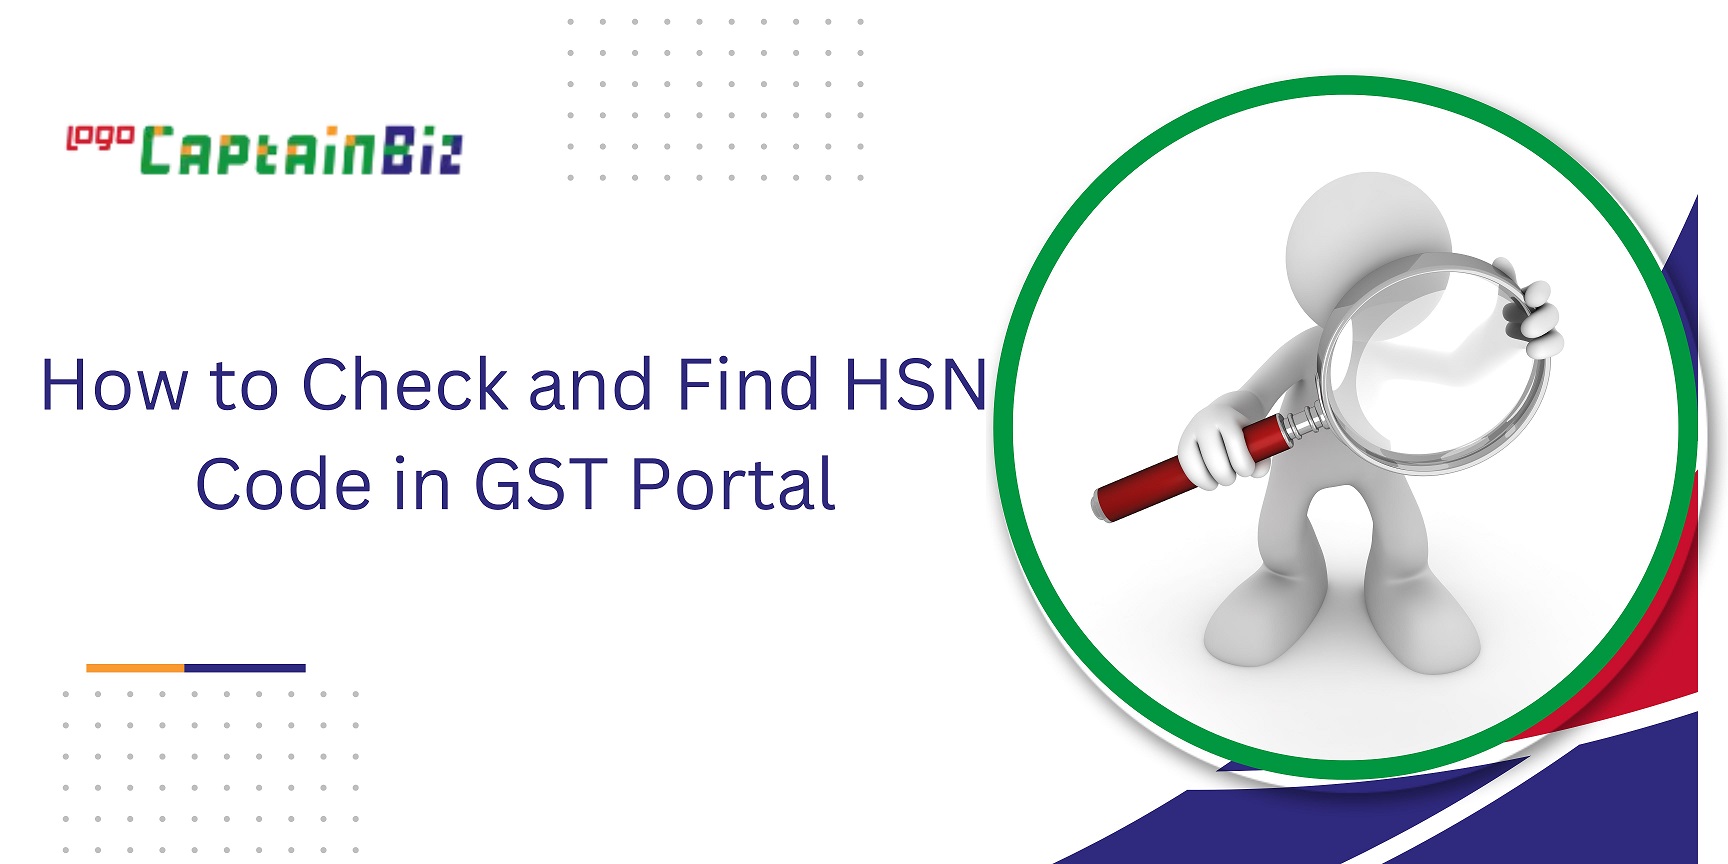 CaptainBiz: How to Check and Find HSN Code in GST Portal